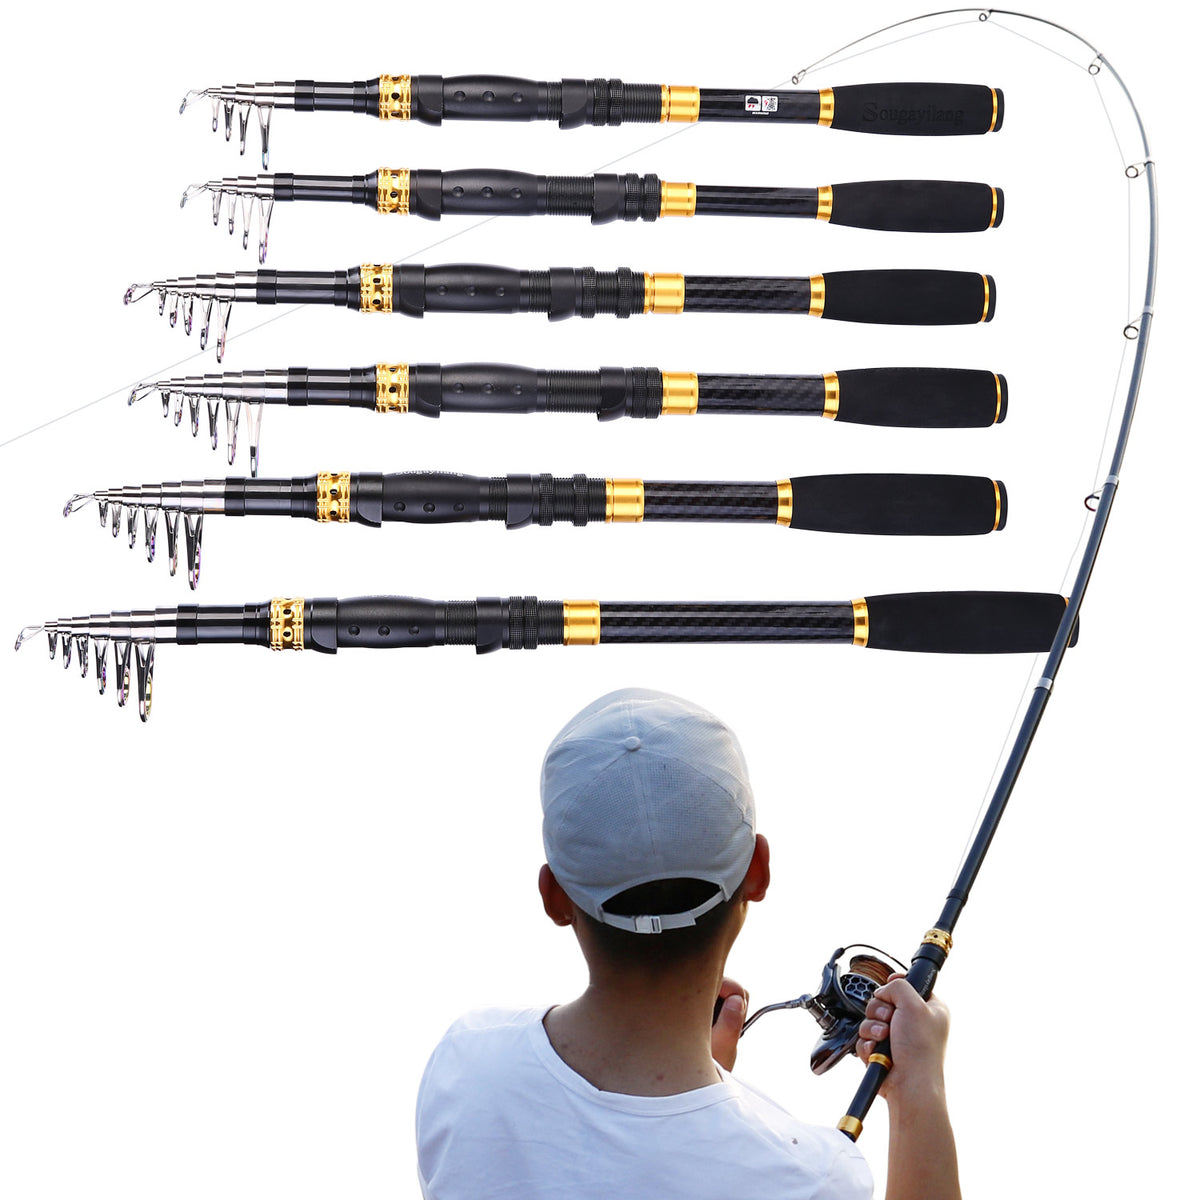  Fishing Rod - 24 Ton Carbon Fiber - Stainless Steel Hooded  Reel Seats - Aluminum Oxide Guide InsertsTelescopic Retractable Spinning  Pole For Saltwater Freshwater Fishing